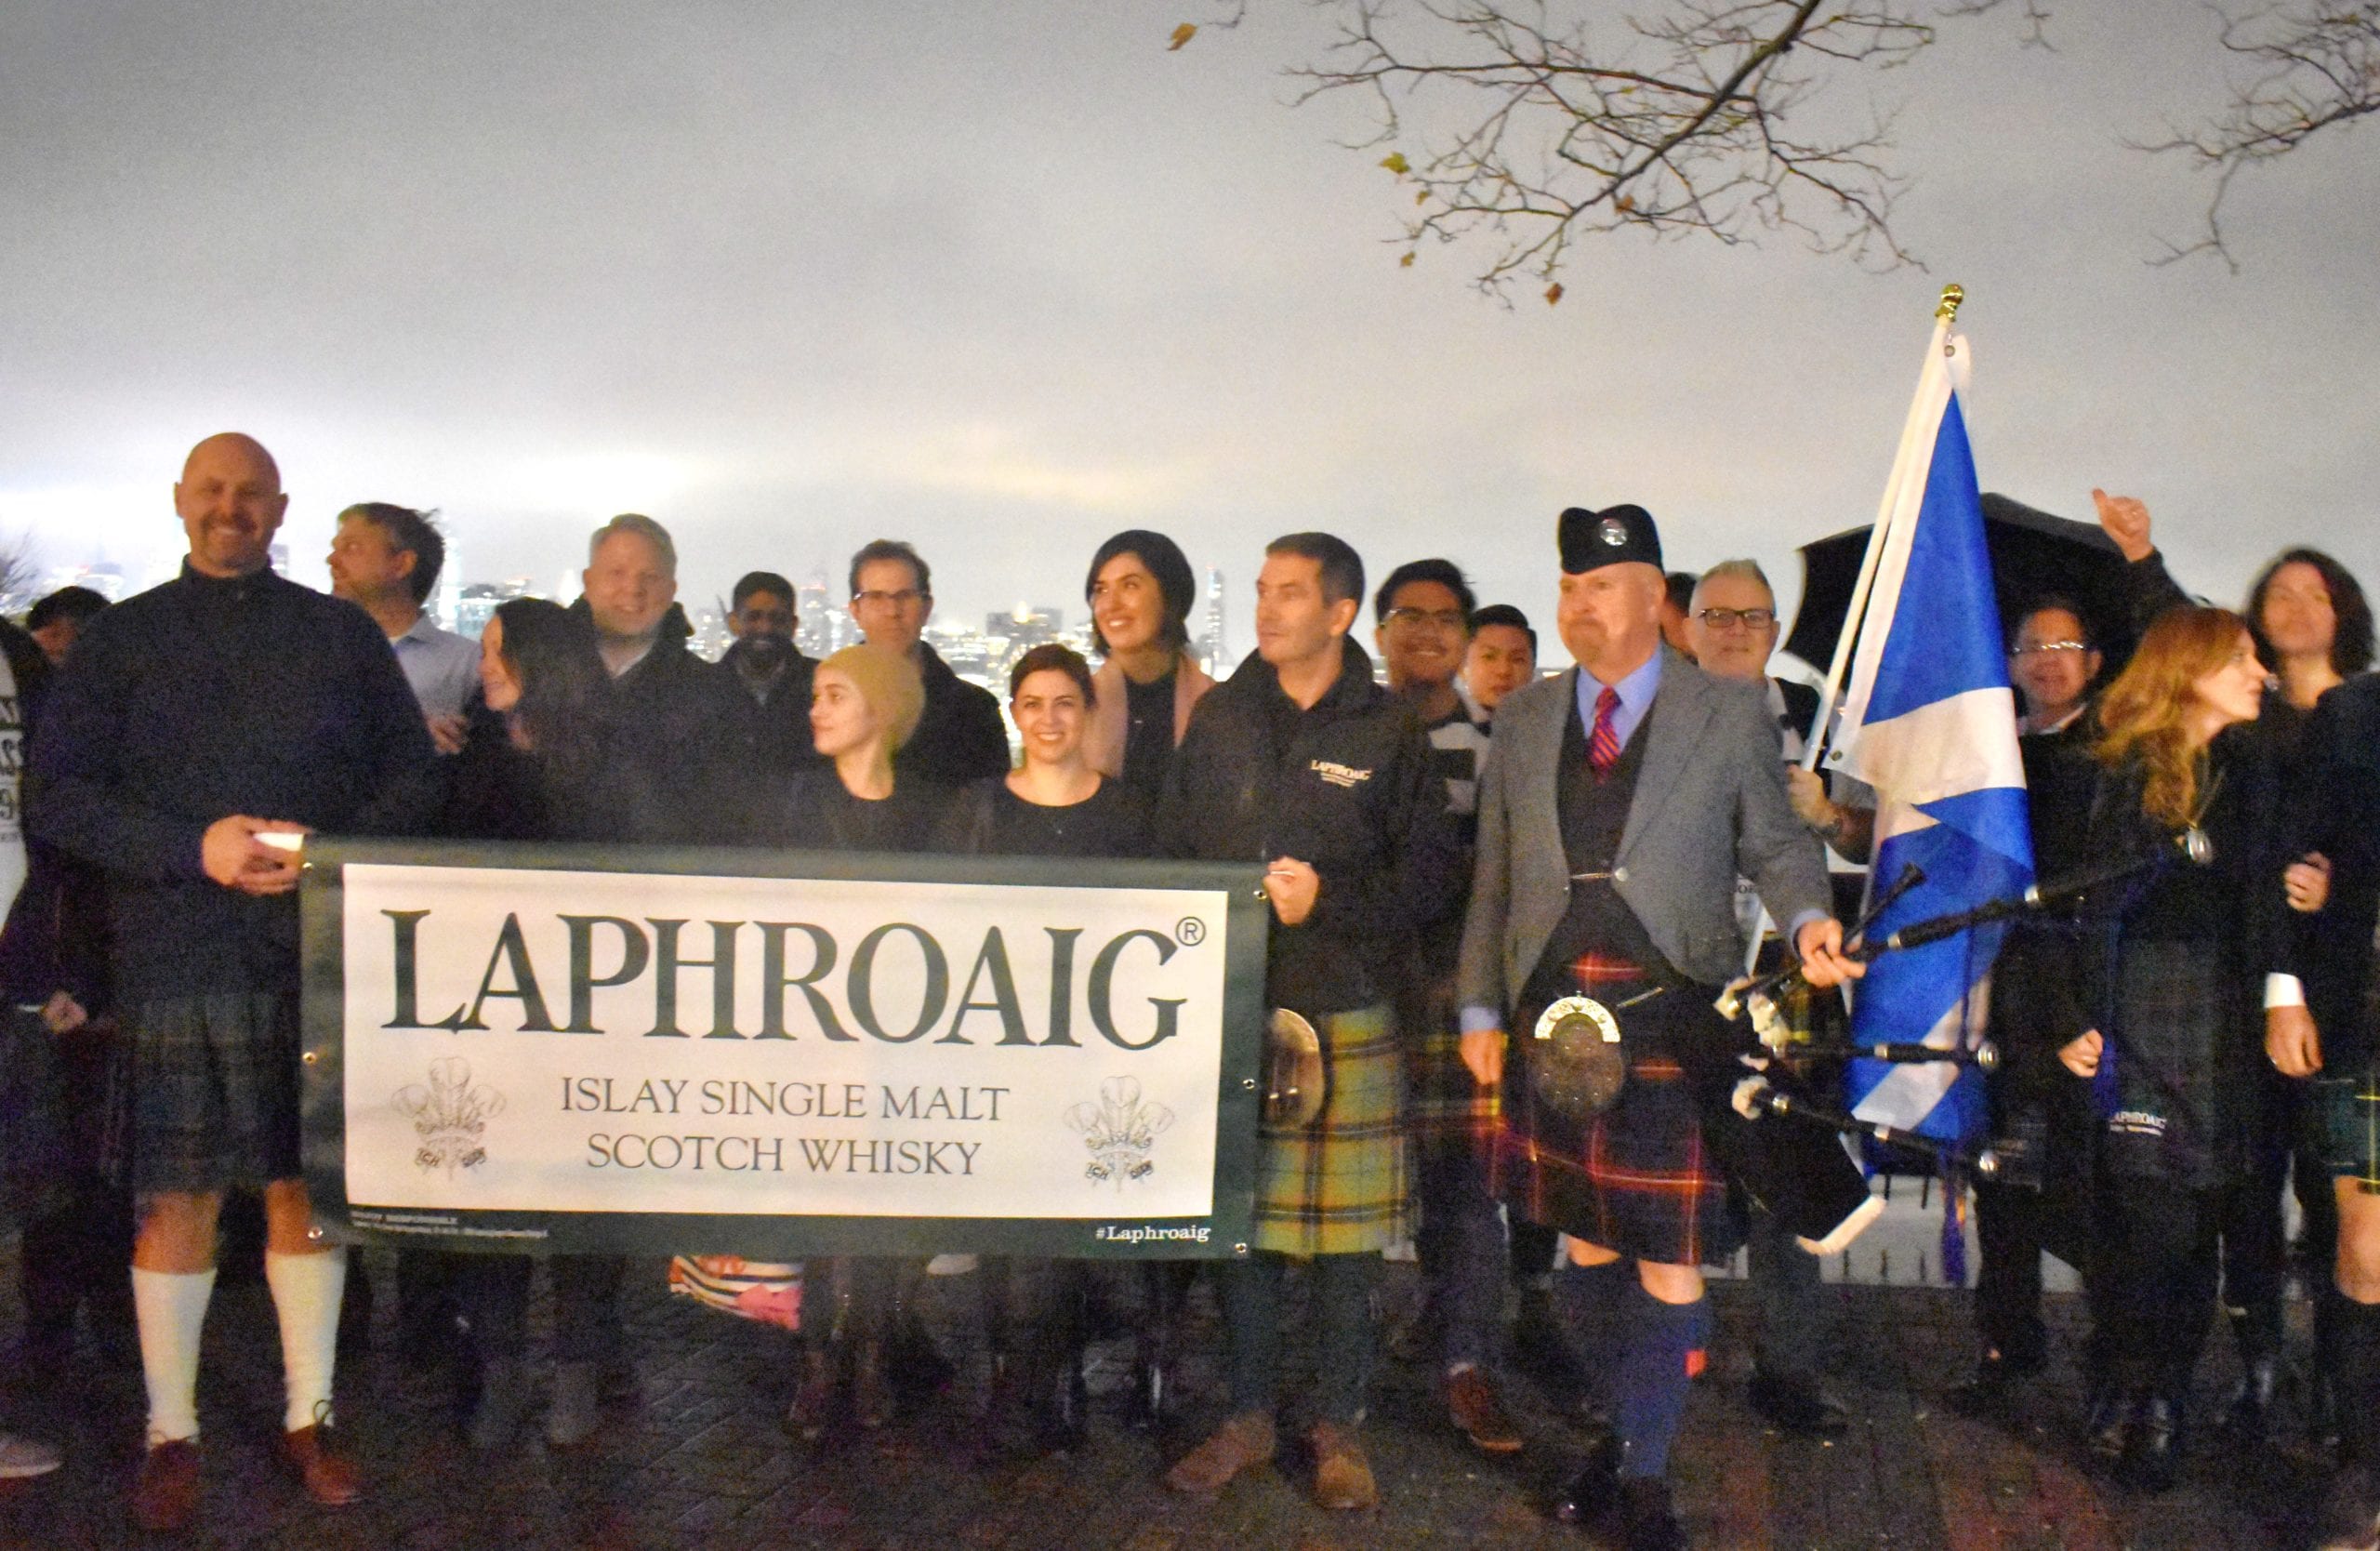 An amazing New Jersey Laphroaig whisky evening in kilt